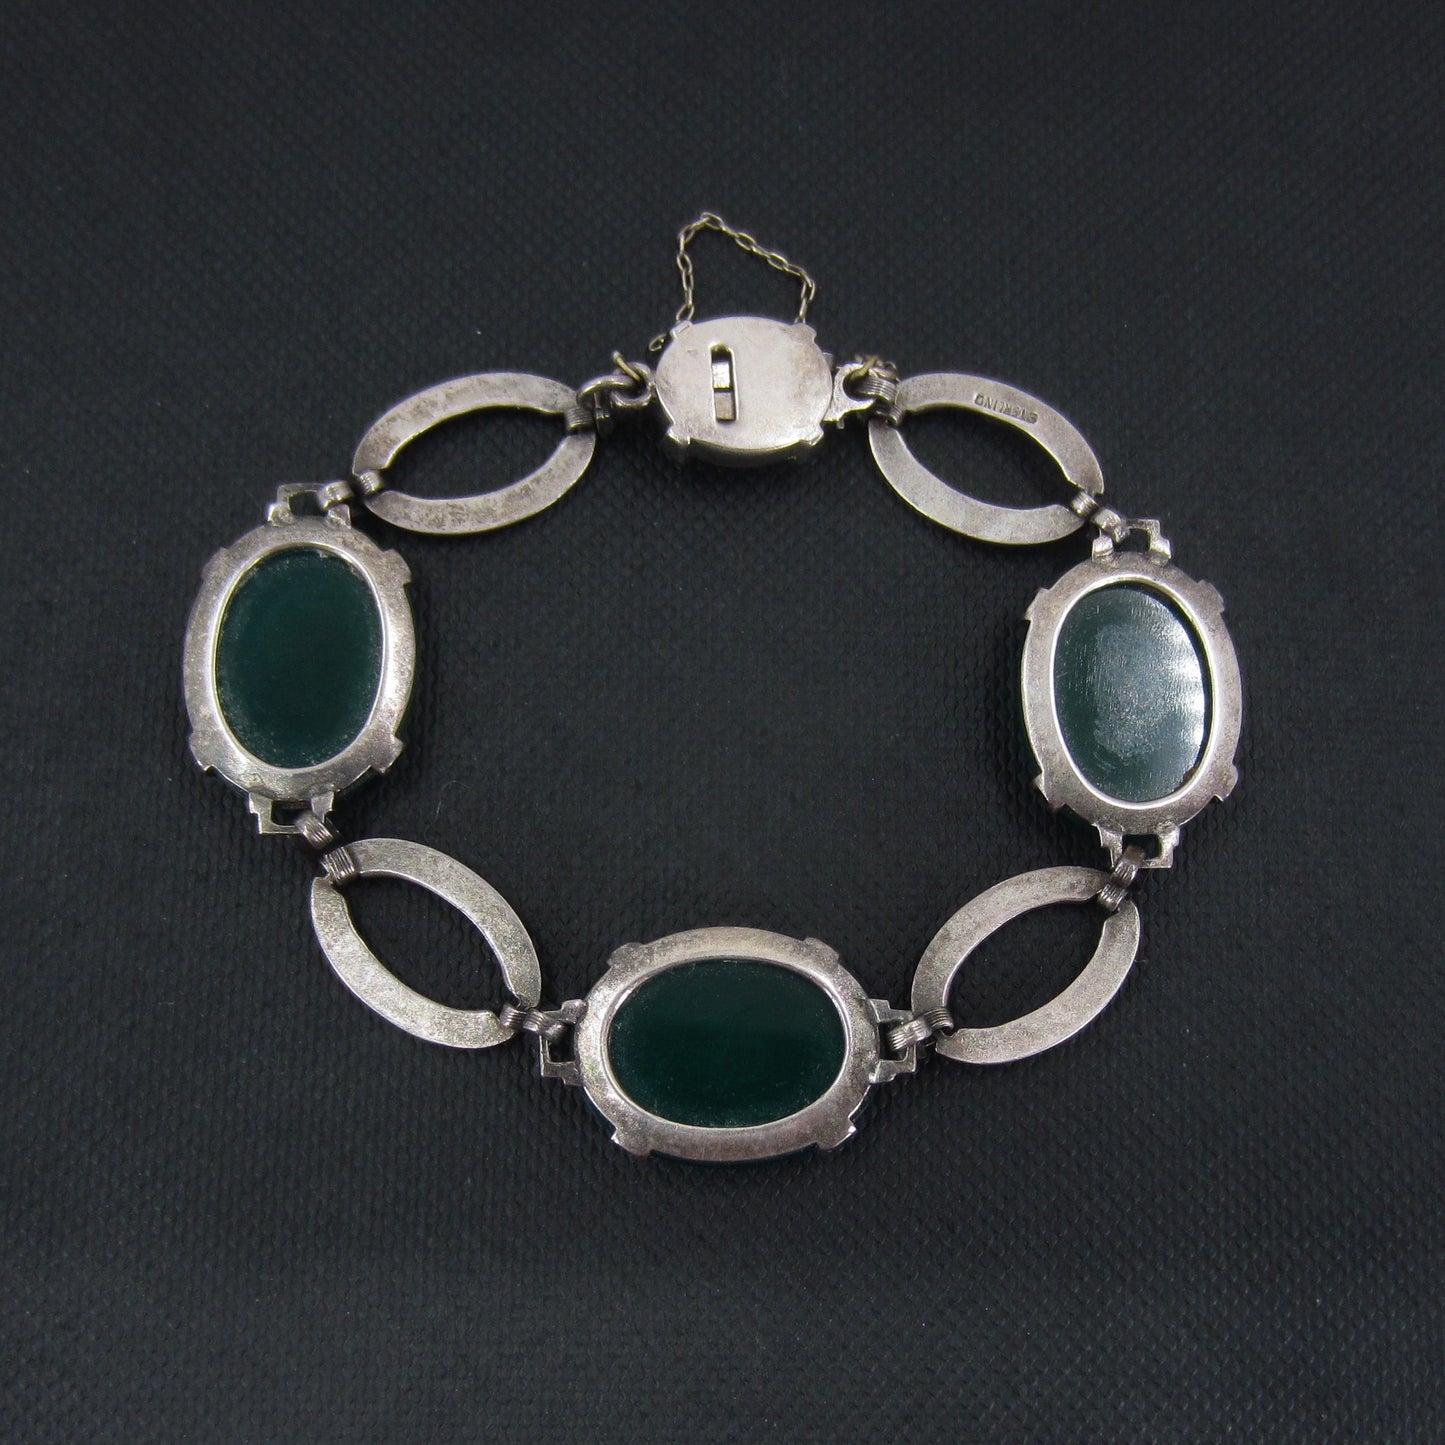 SOLD--Art Deco Green Chalcedony and Marcasite Bracelet Sterling c. 1930